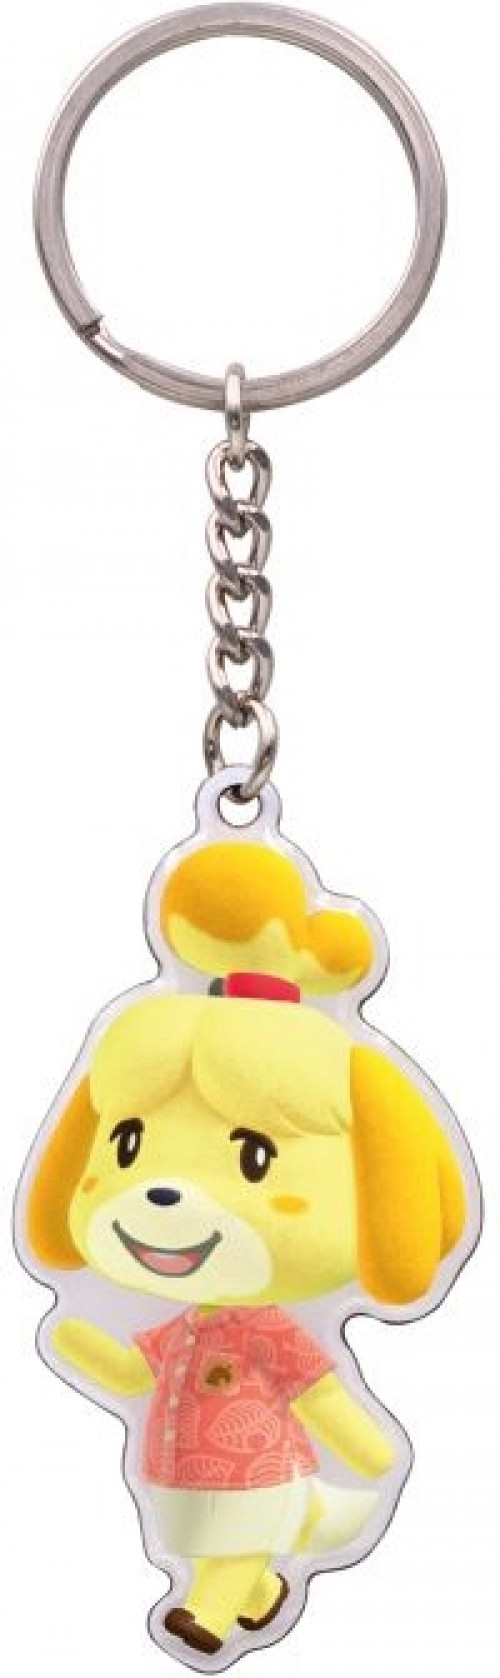 Animal Crossing Keychain - Isabelle